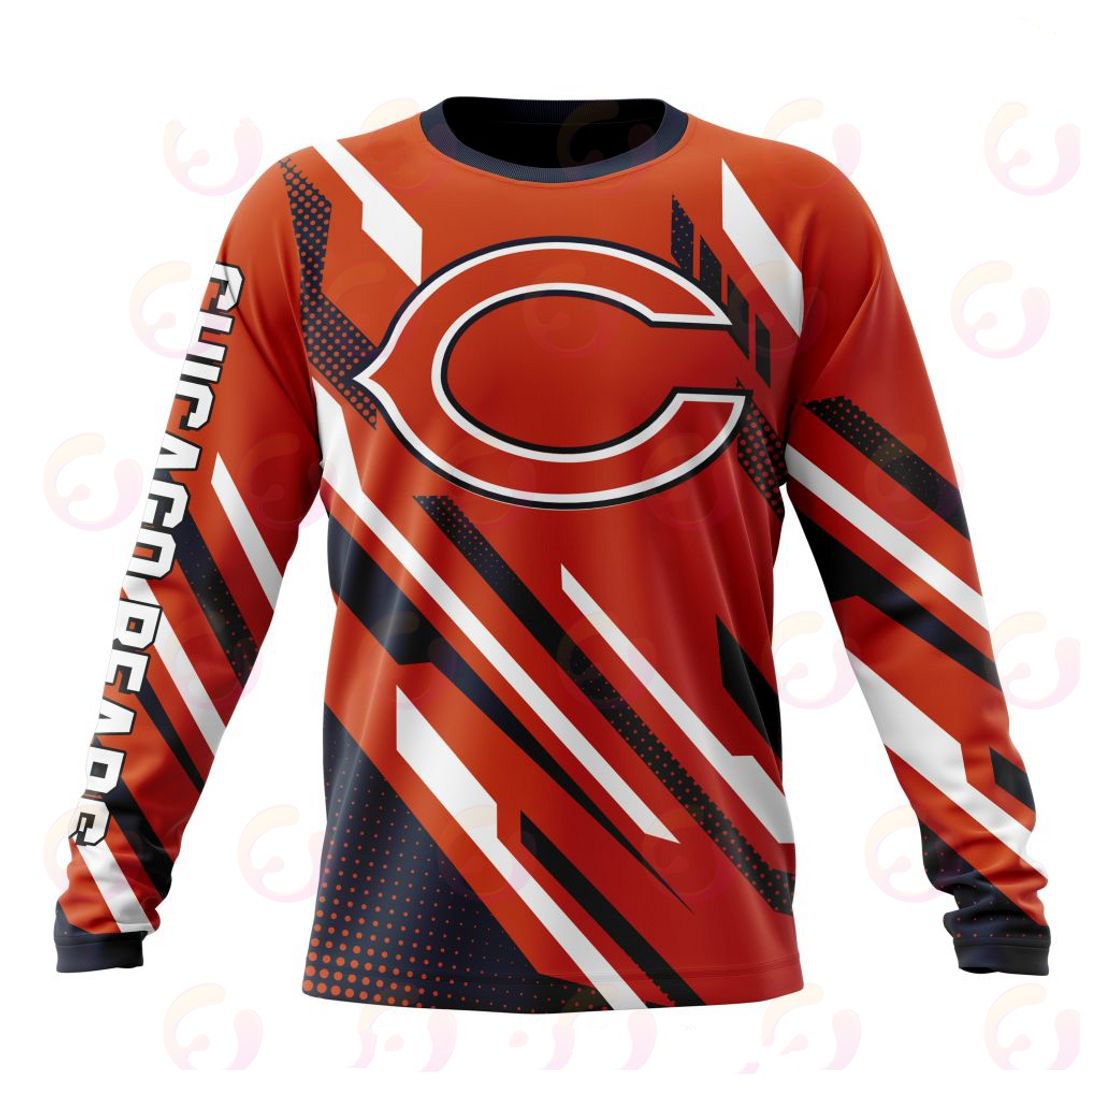 CHICAGO BEARS 3D HOODIE SPECIAL MOTOCROSS CONCEPT